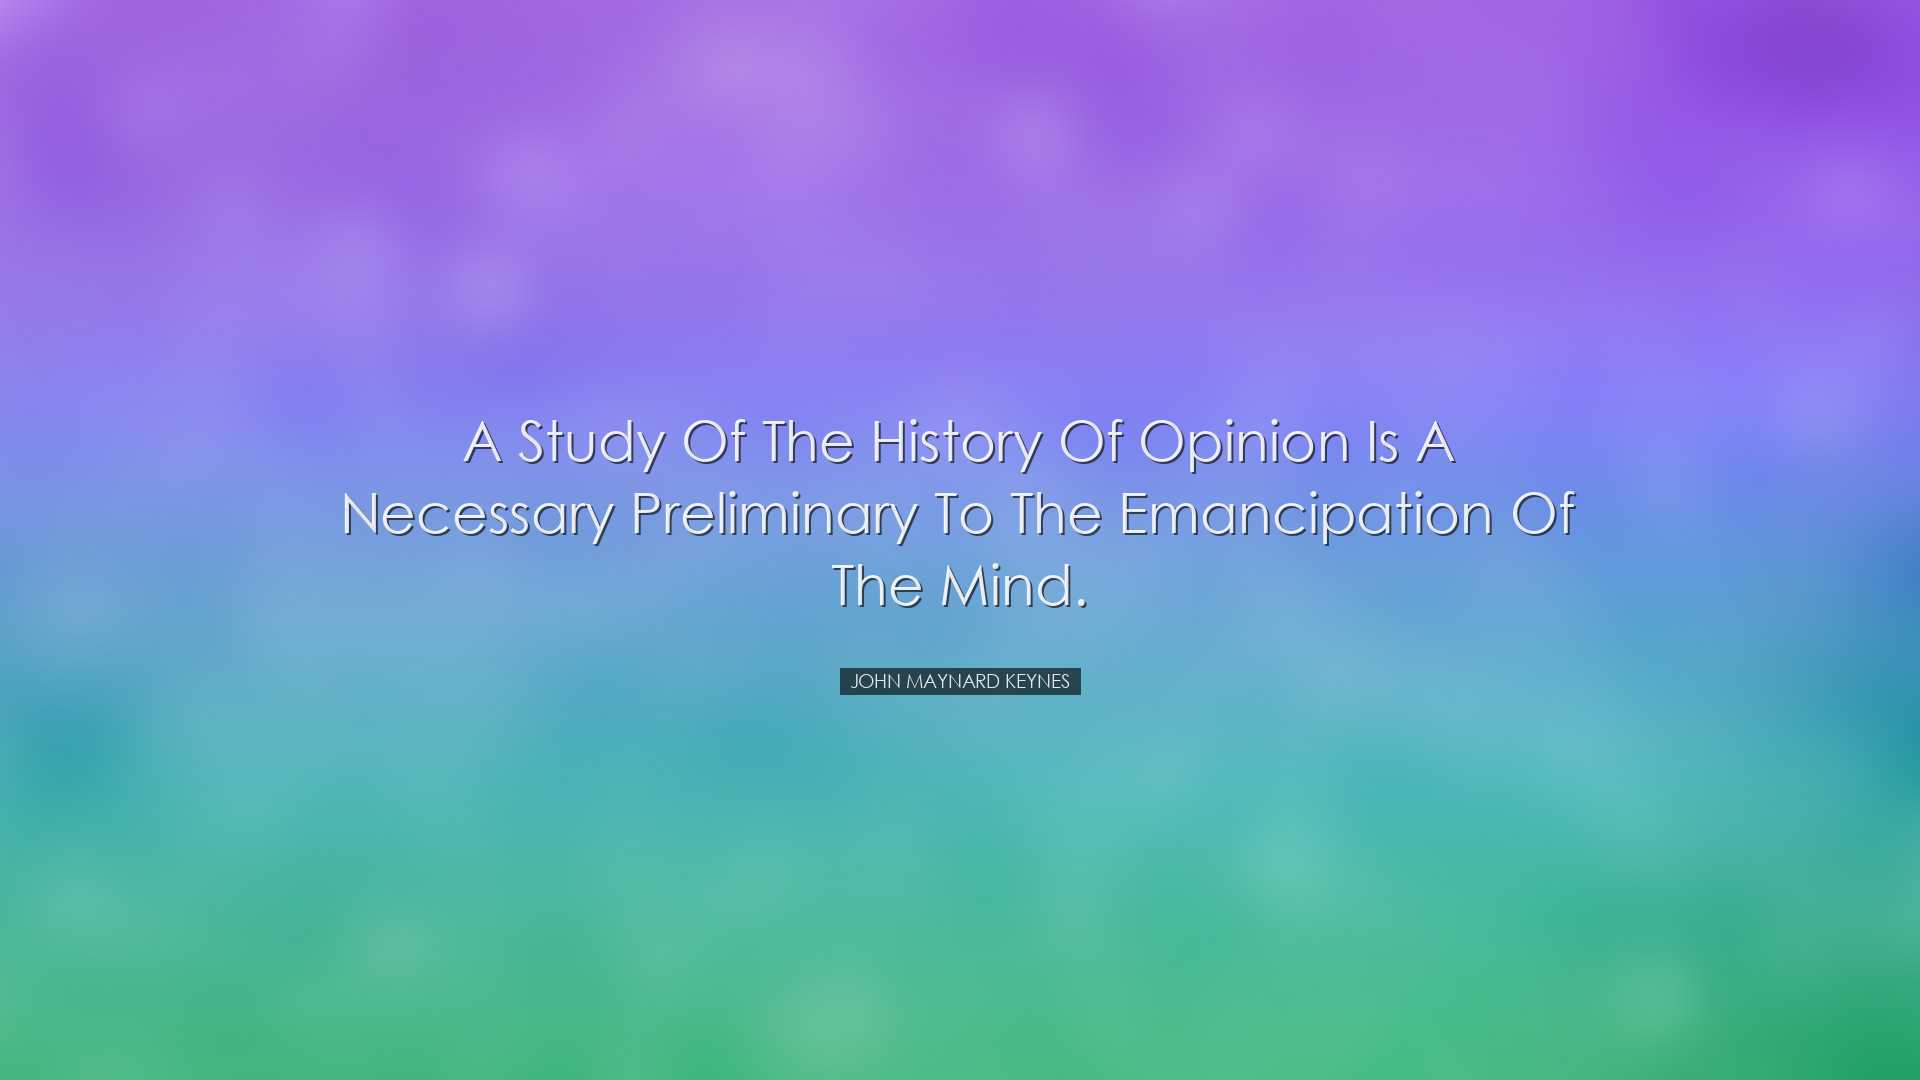 A study of the history of opinion is a necessary preliminary to th